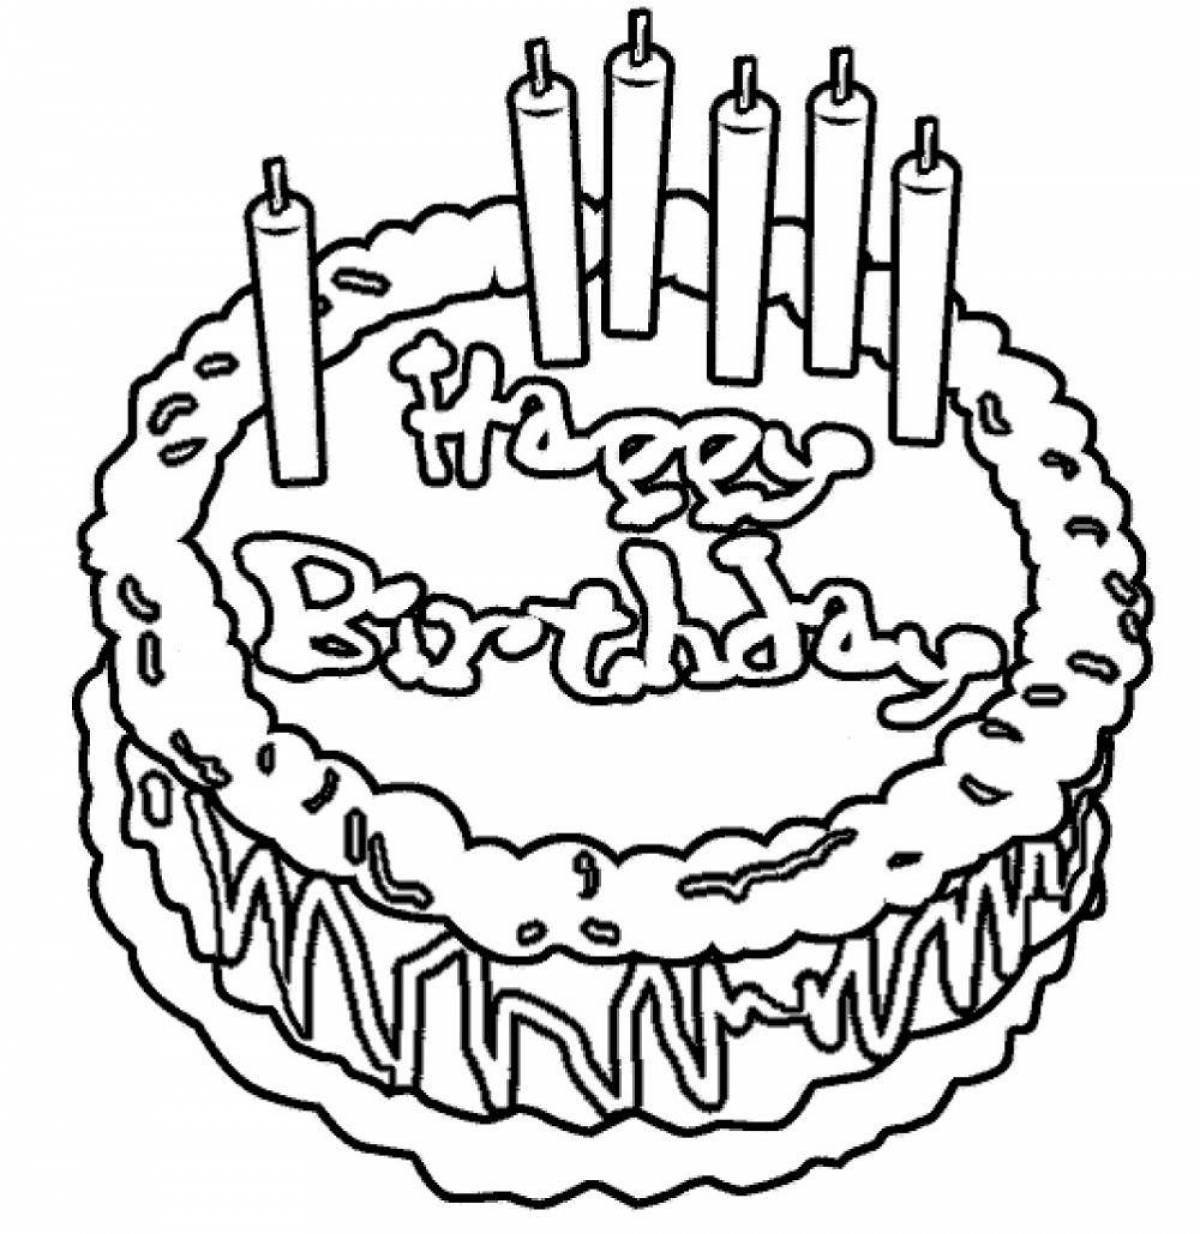 Radiant happy birthday dad coloring pages for kids